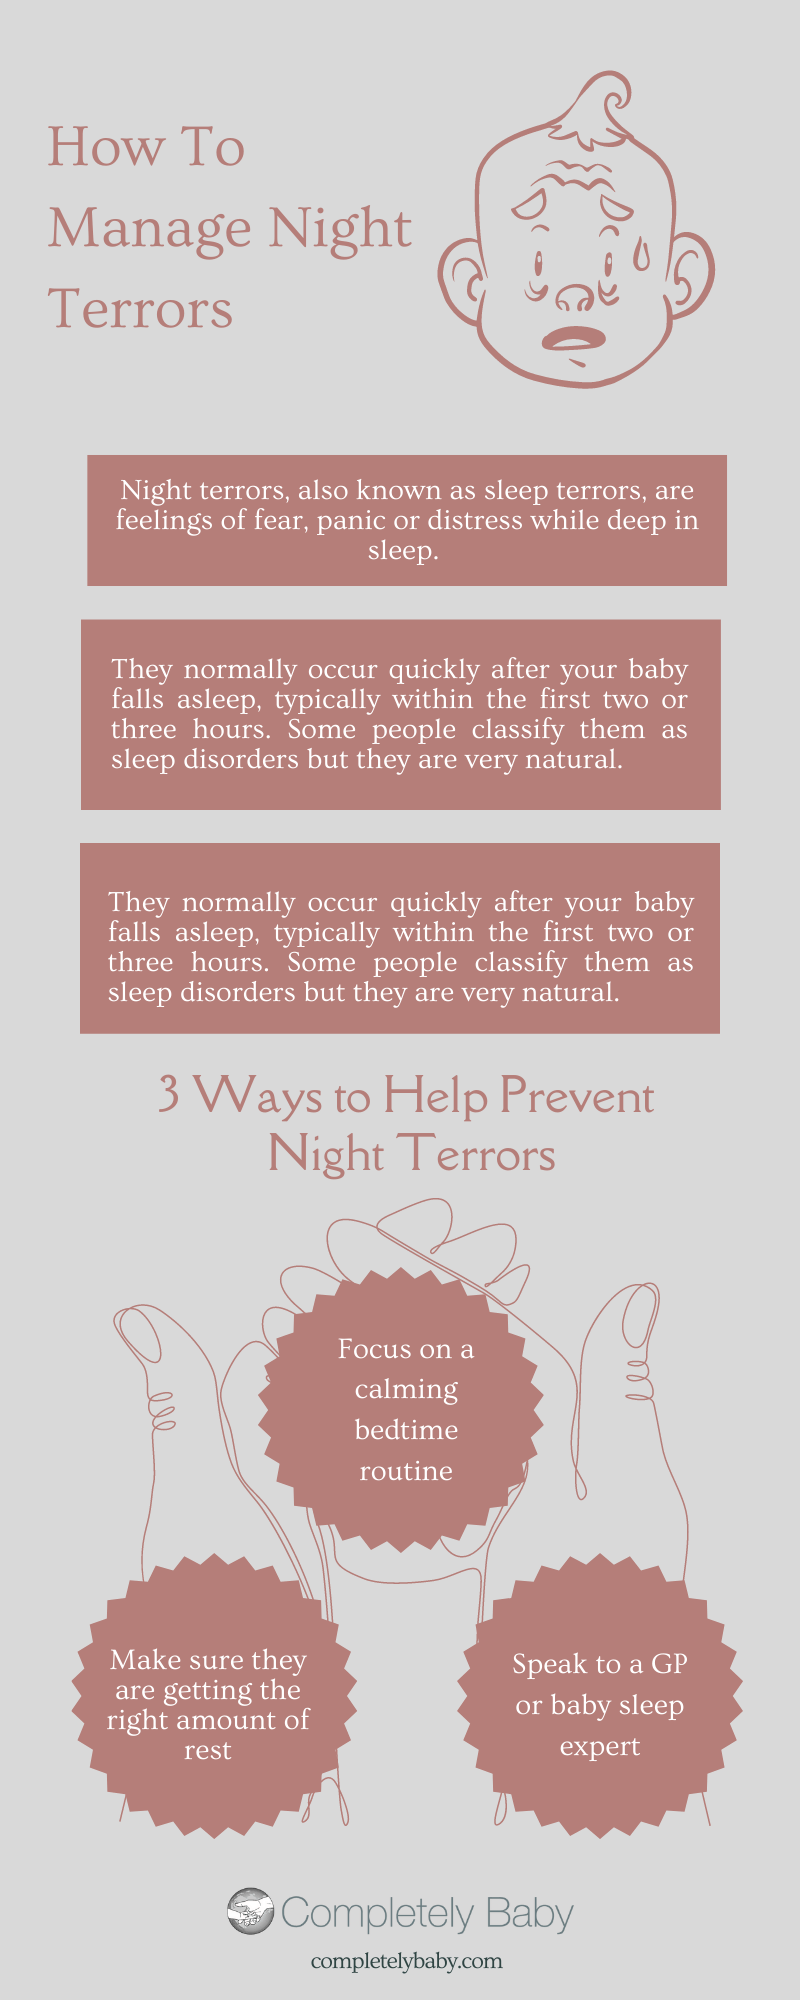 How To Manage Night Terrors Infographic